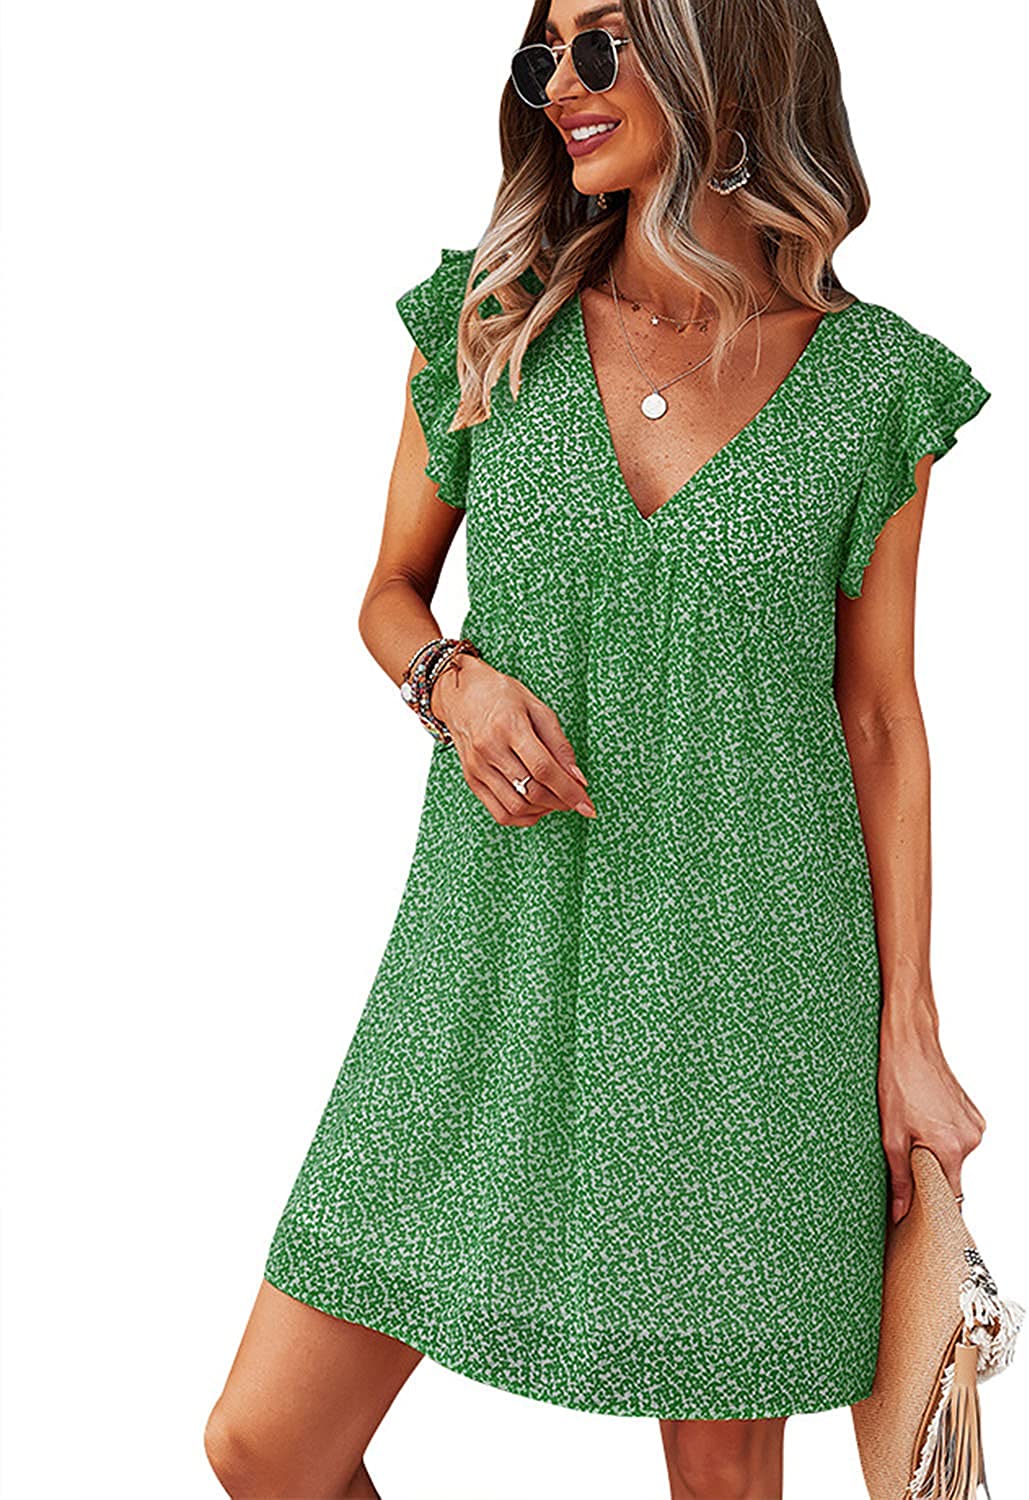 What Women Want: A Cute Summer Dress With Pockets - The Mom Edit